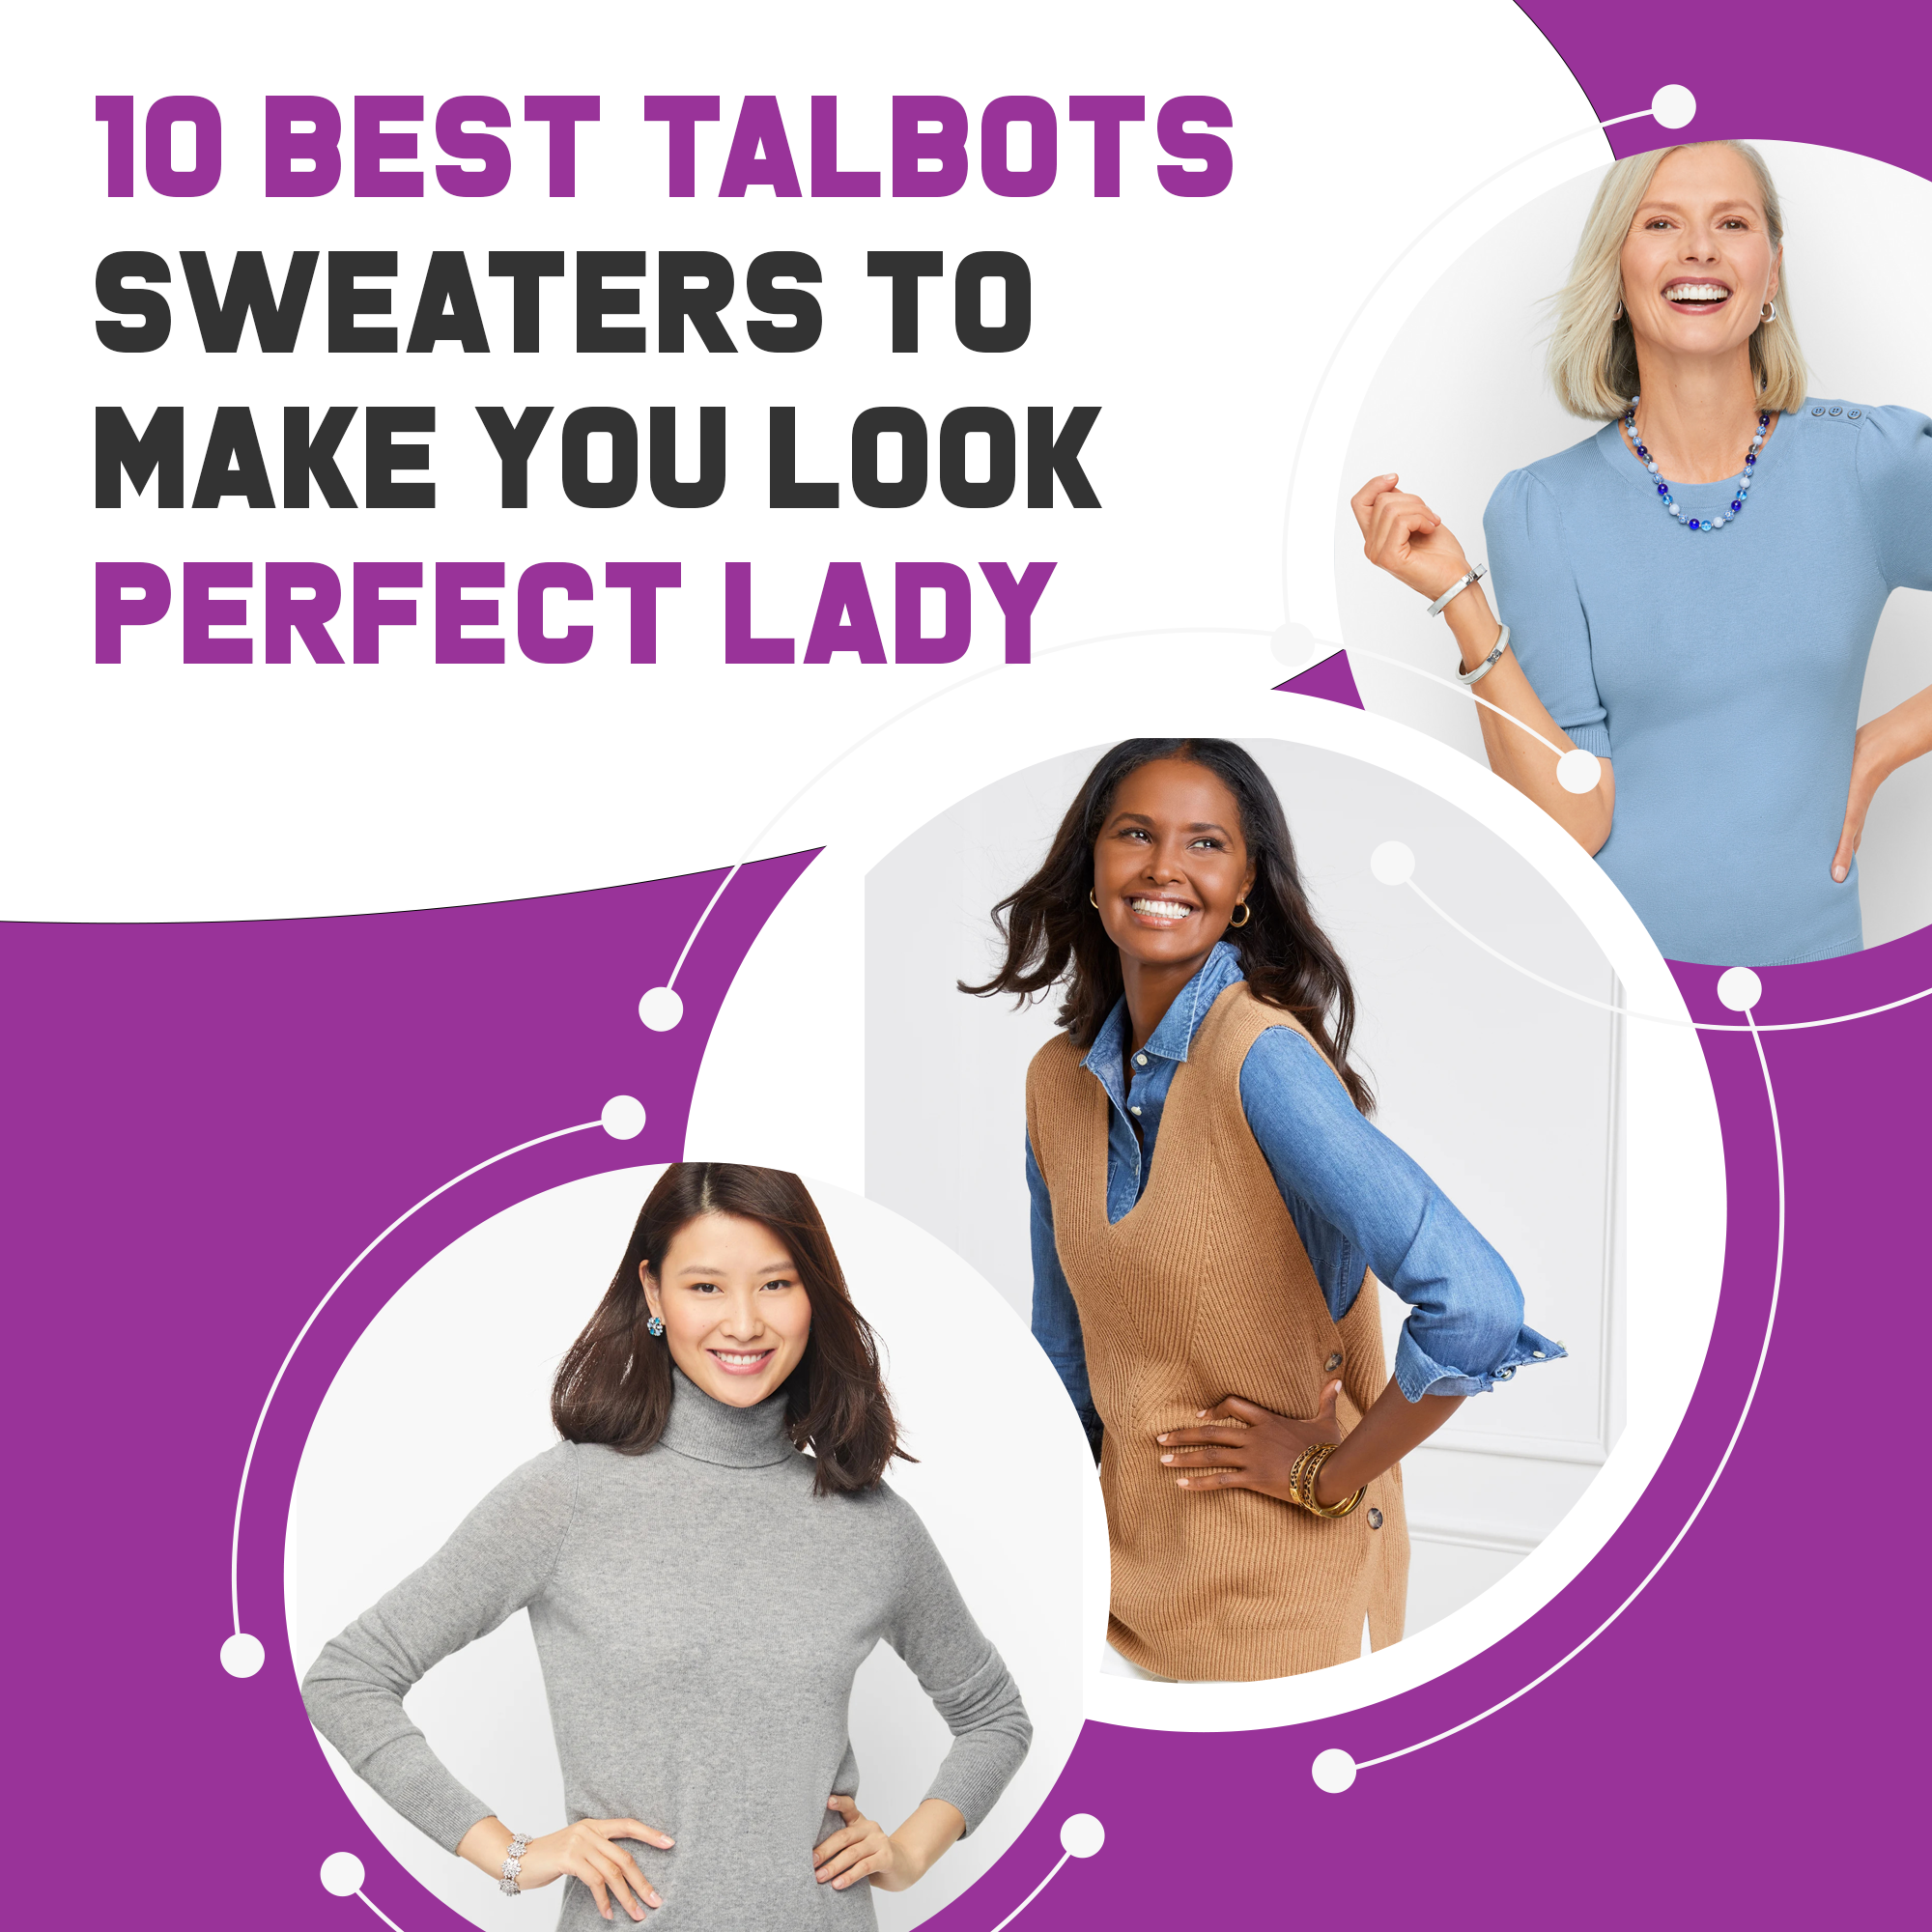 10 Best Talbots Sweaters To Make You Look Perfect Lady